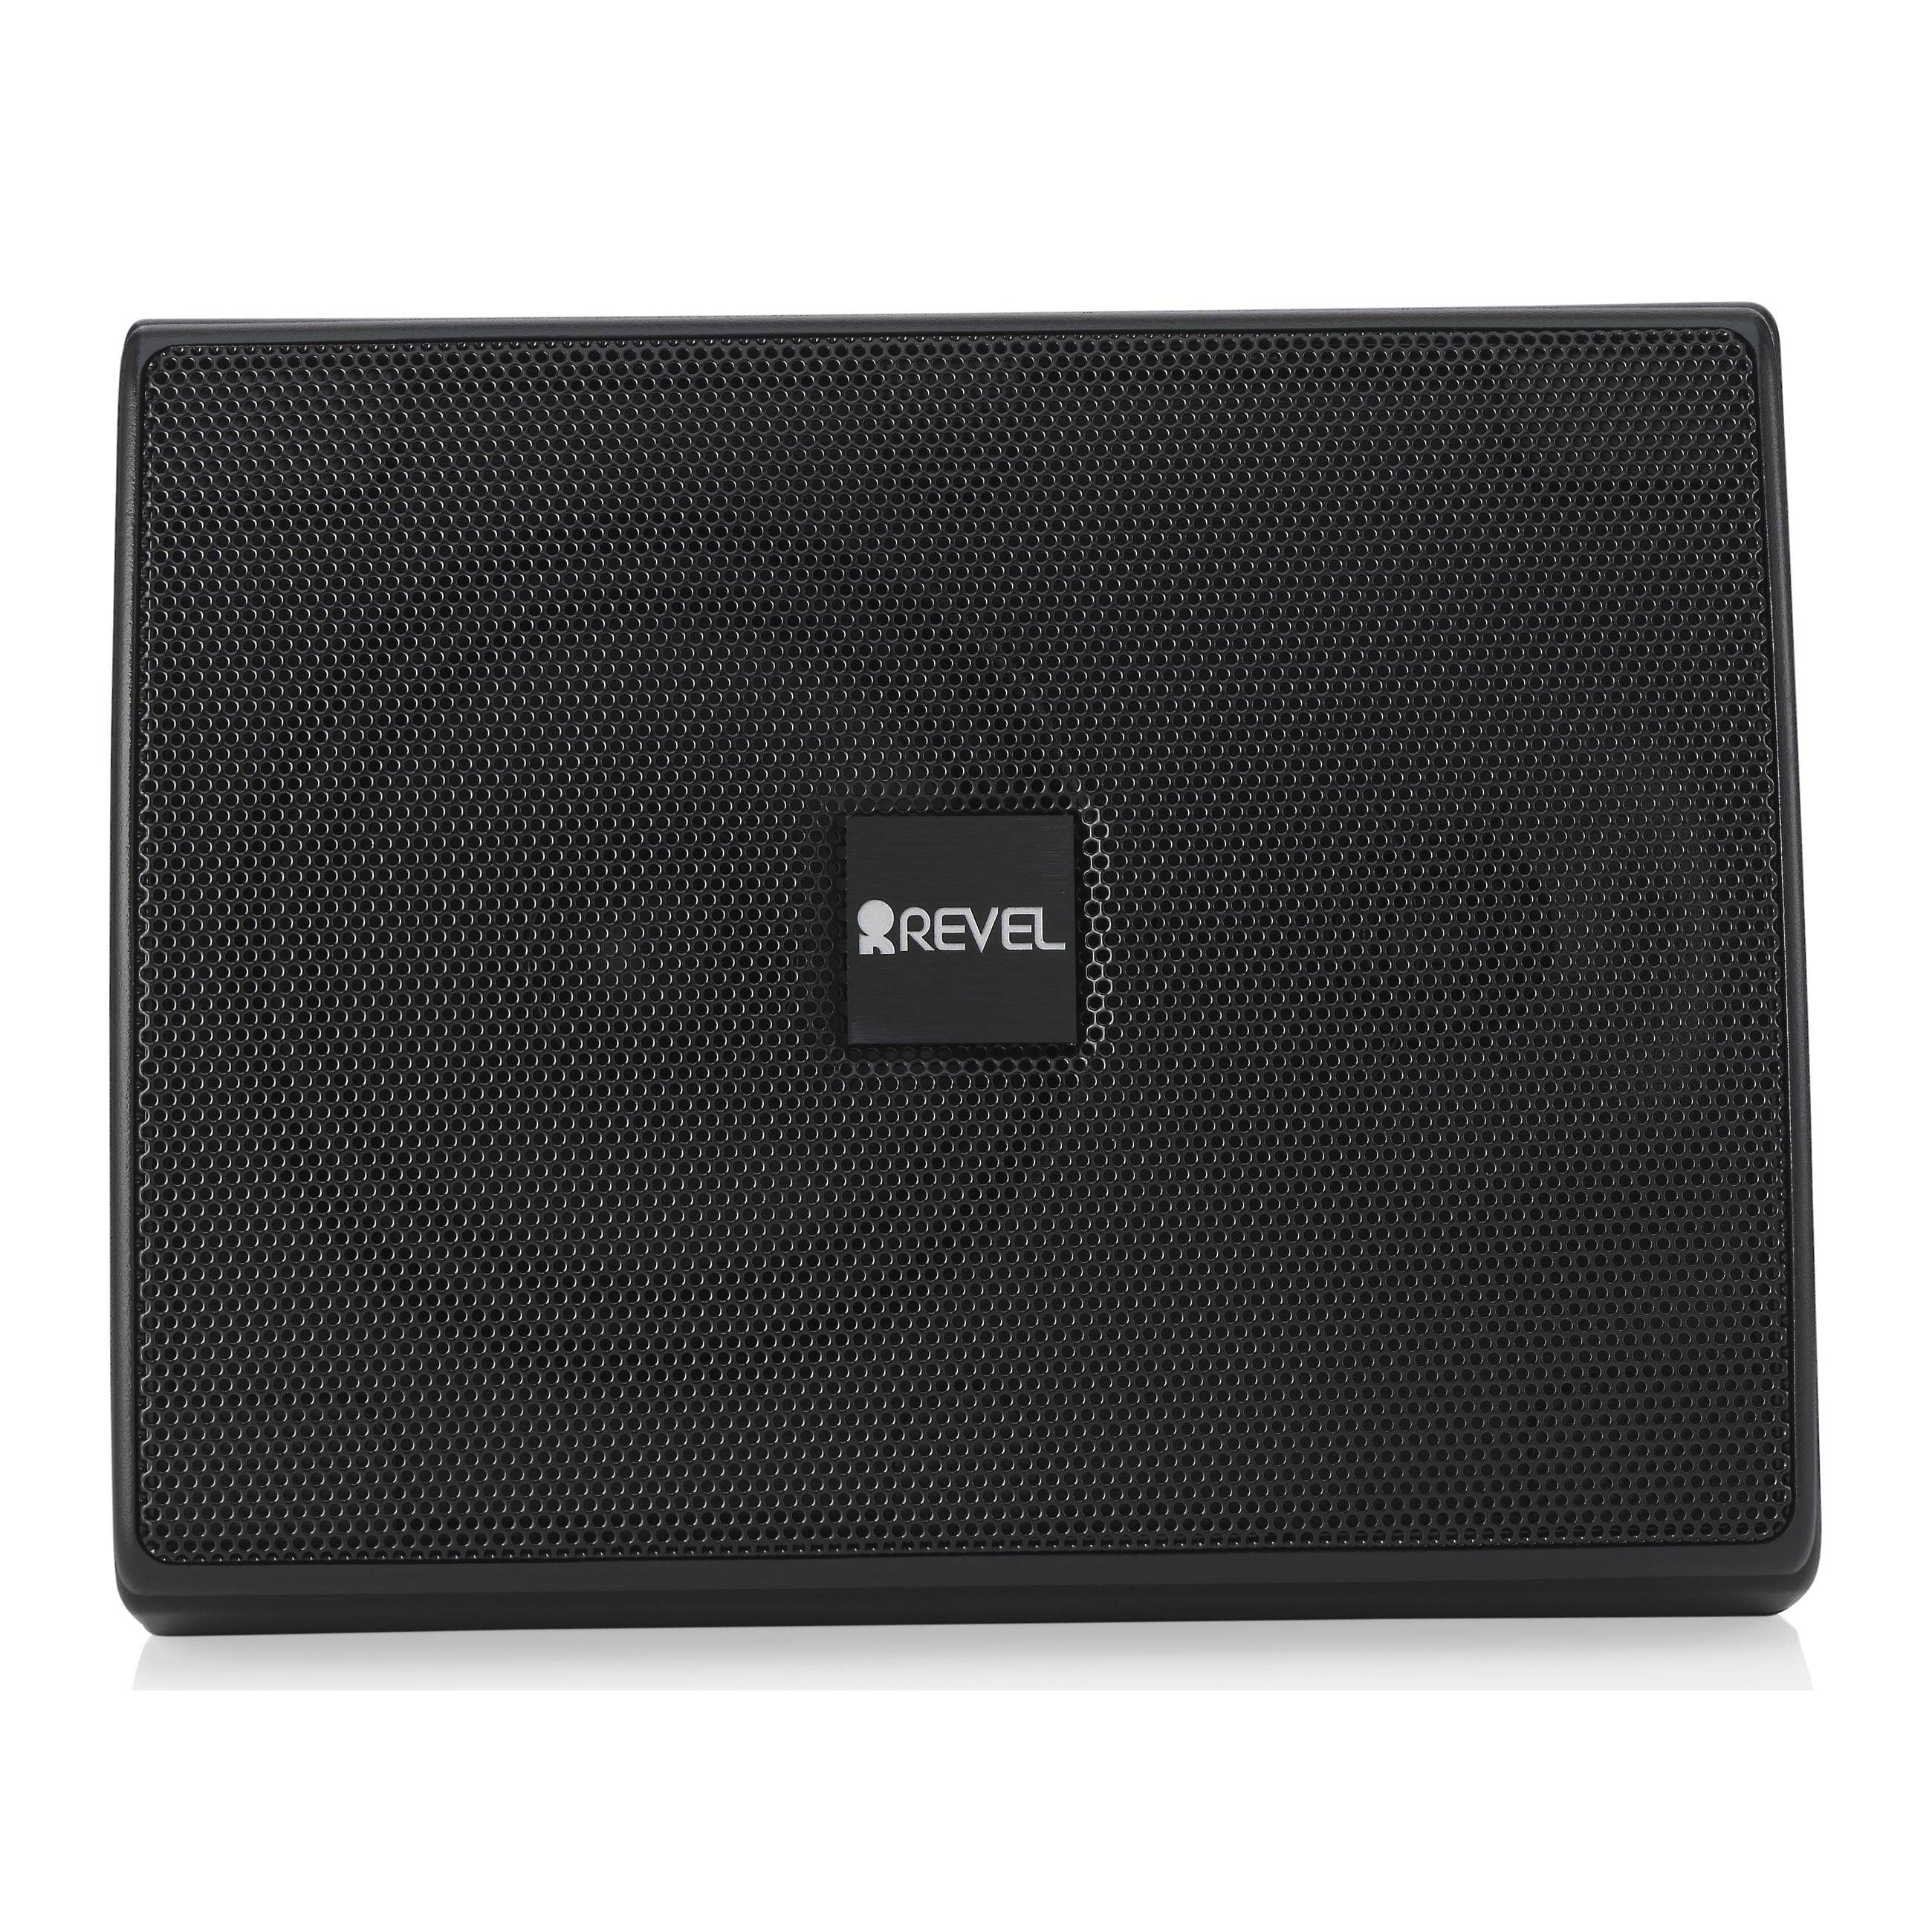 Revel M55XC 2-way Extreme Climate Outdoor Loudspeaker (pair)